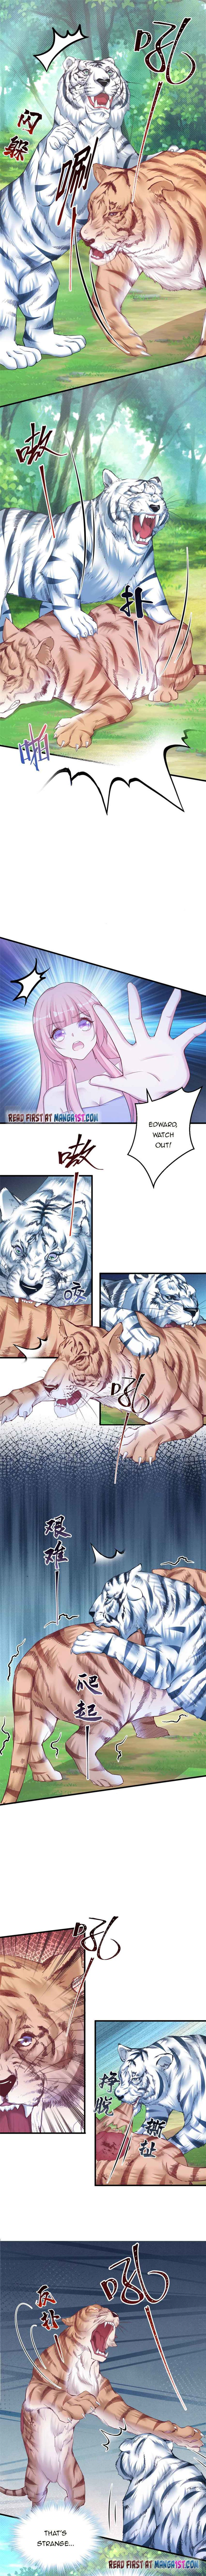 Beauty and the Beasts Chapter 355 page 2